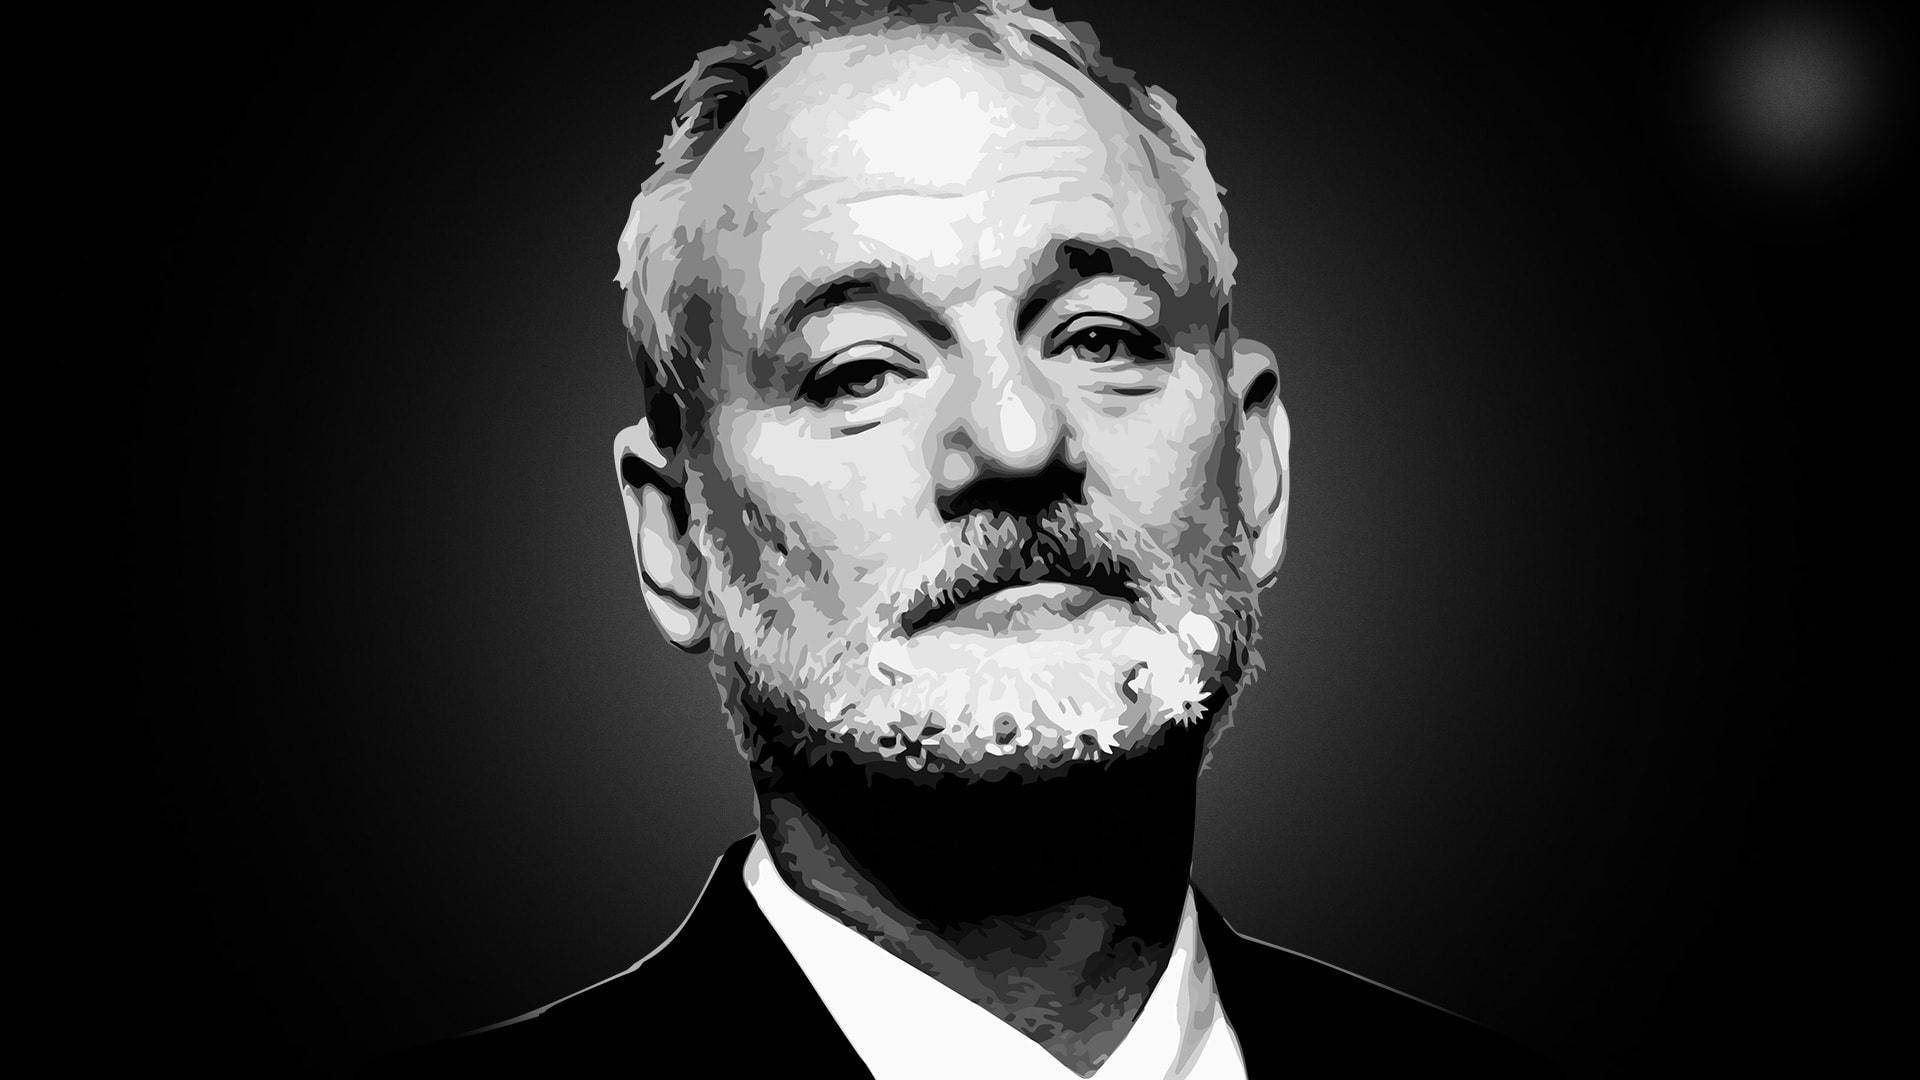 Bill Murray American Actor Black And White Wallpaper